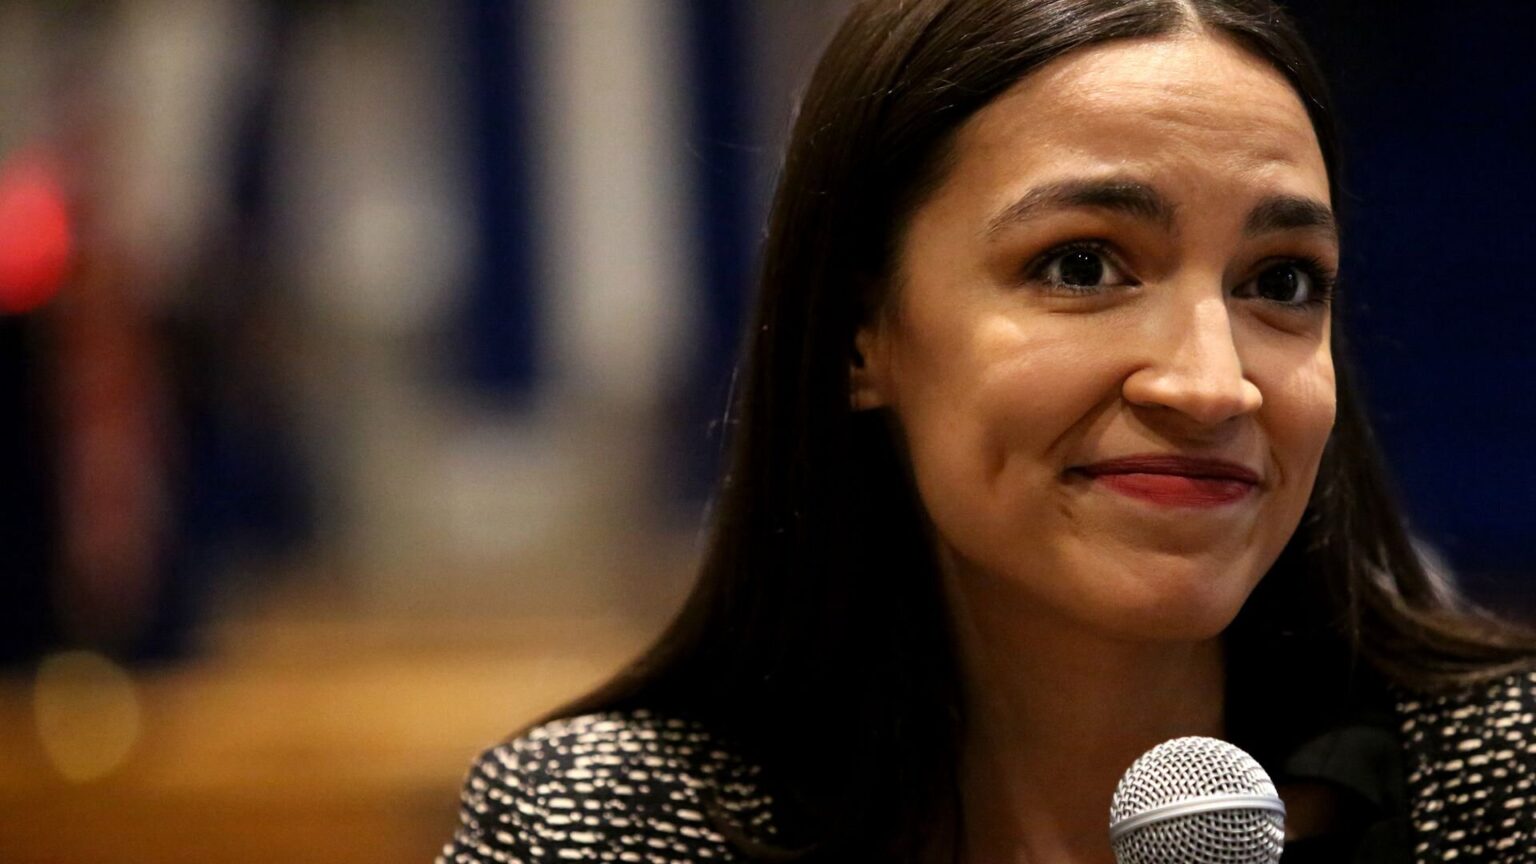 Who says politics can't be as gripping as the latest binge-worthy TV series? Here's AOC's net worth and all that goes with it.